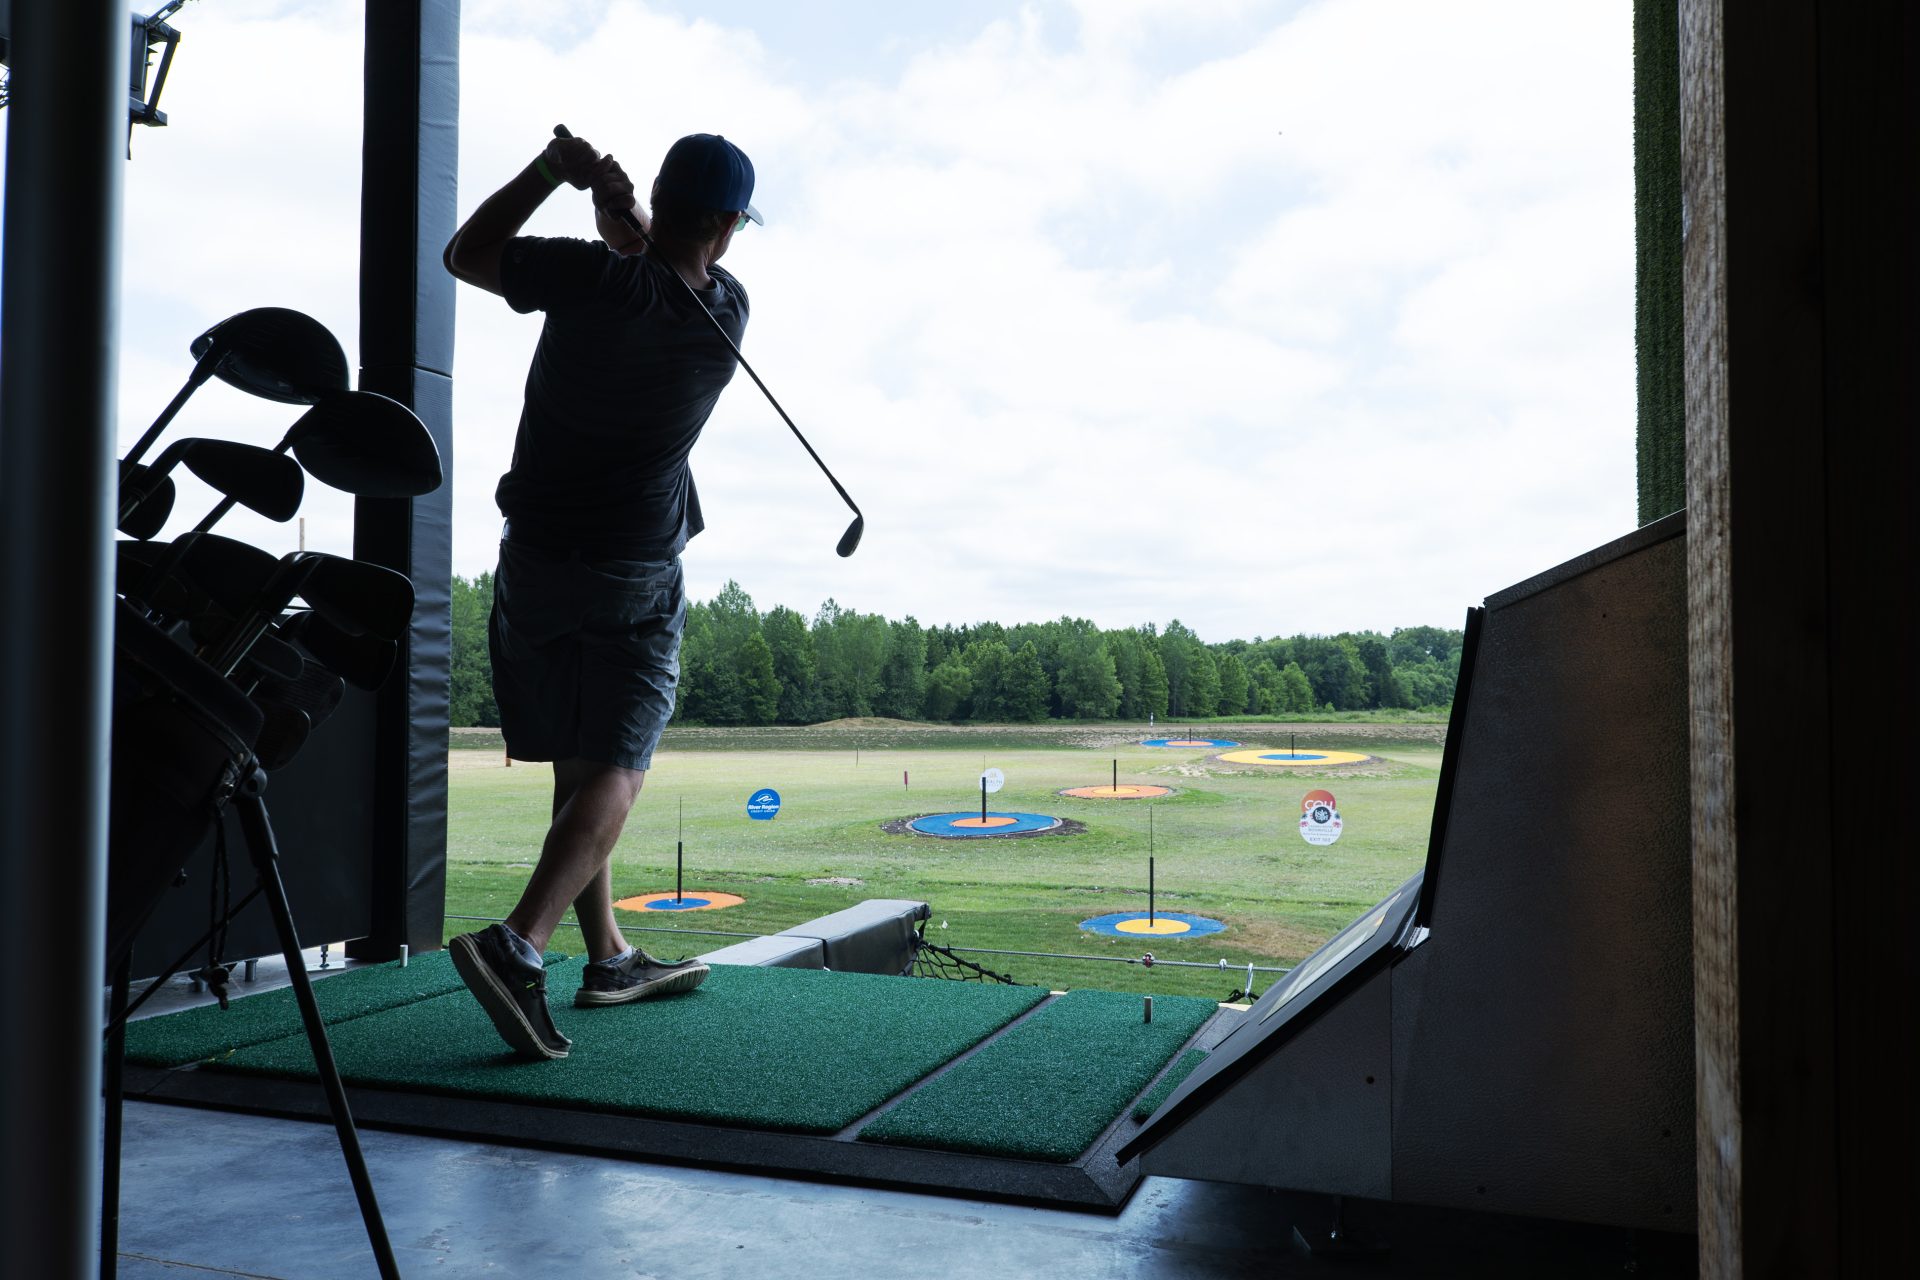 (LISTEN): Midway Golf and Games hopes to become mid-Missouri’s premier family destination